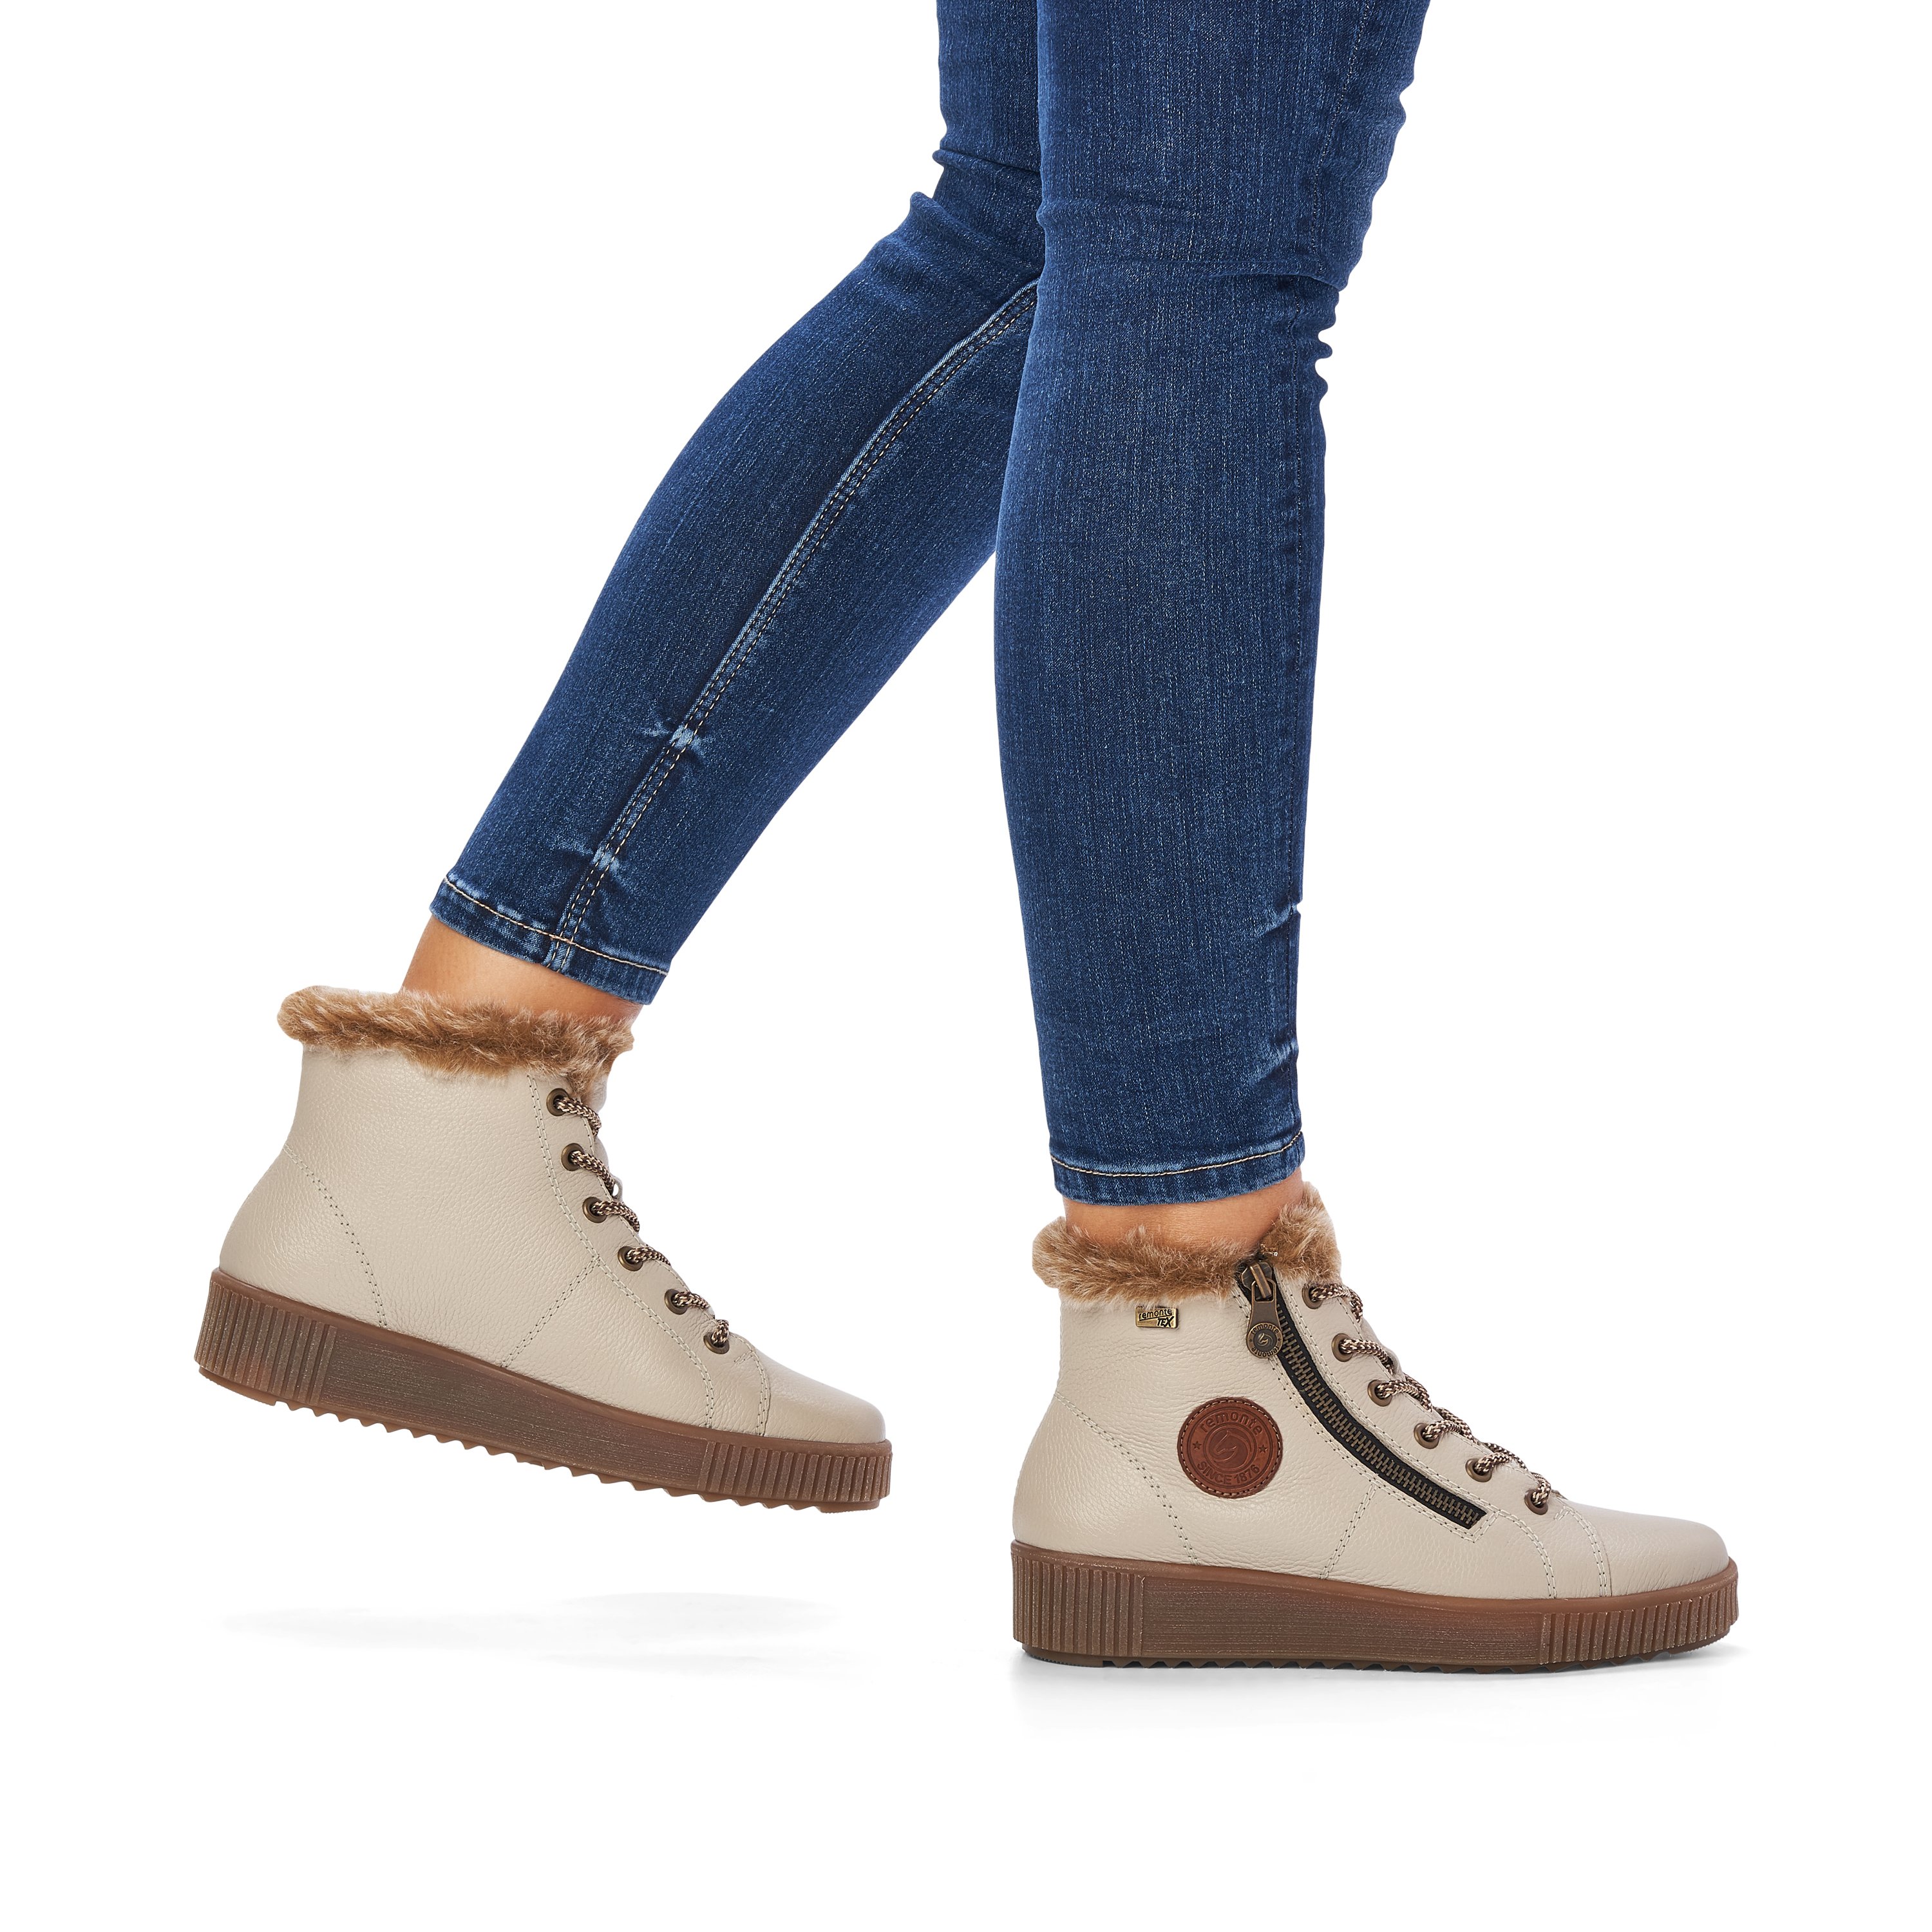 Cinnamon white remonte women´s lace-up boots R7980-80 with lacing and zipper. Shoe on foot